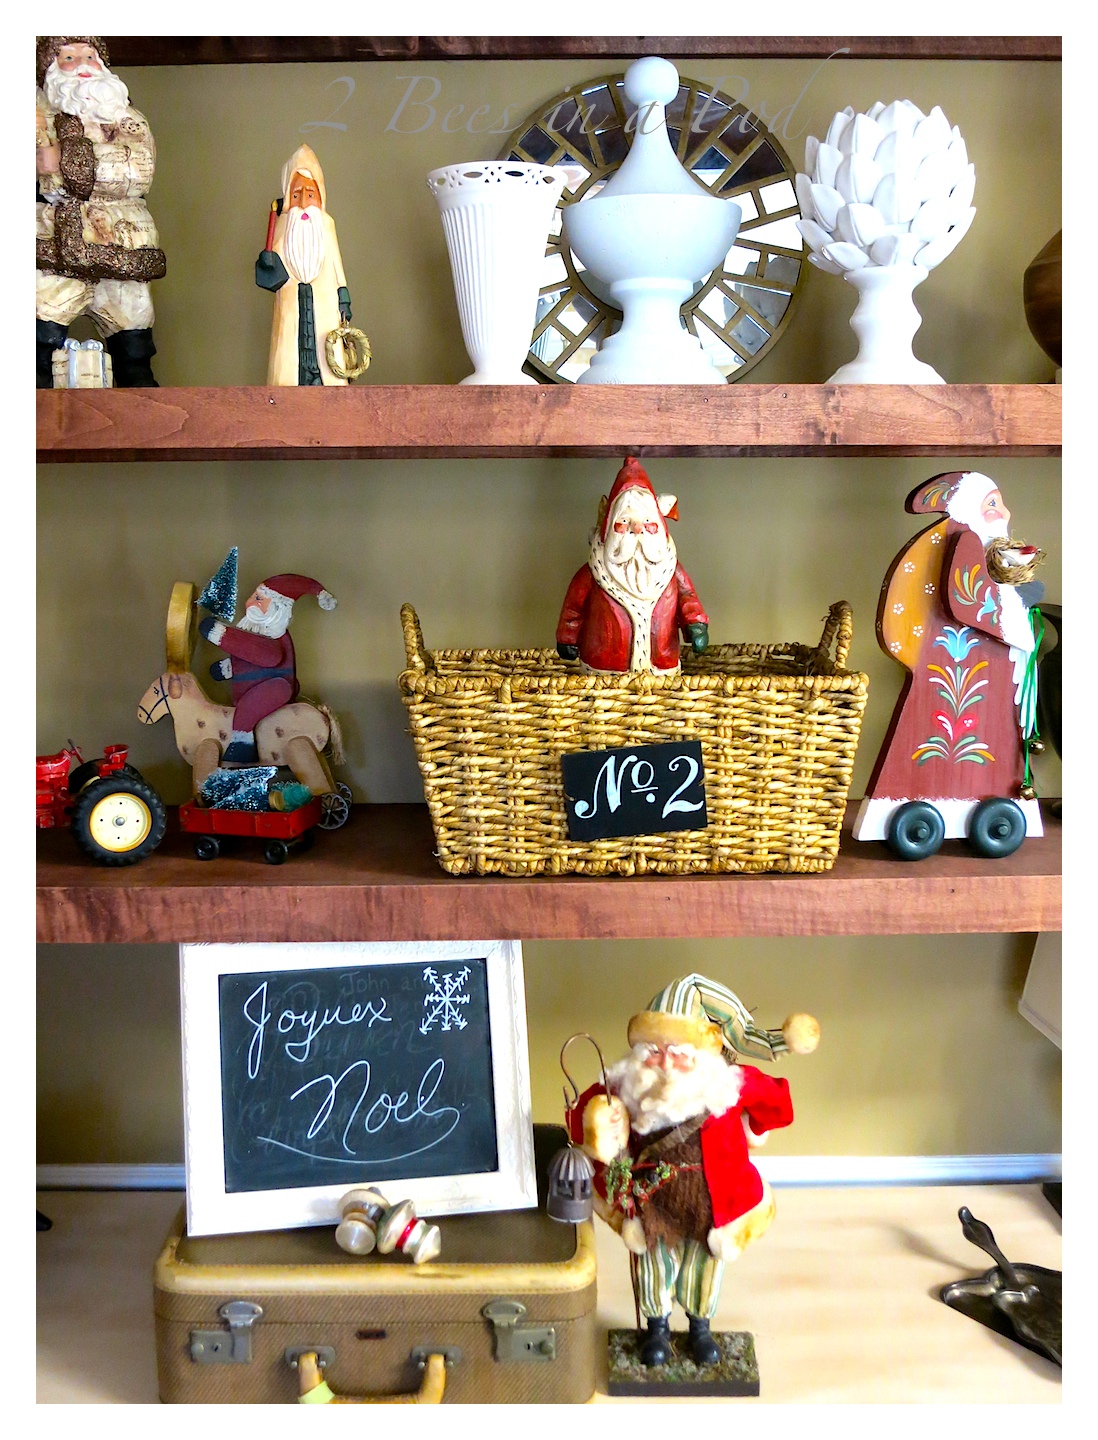 Christmas Home Tour 2014 - traditional green and red decor. Also rustic and vintage decor. Lots of Santas, vintage Buddy L truck and tractor